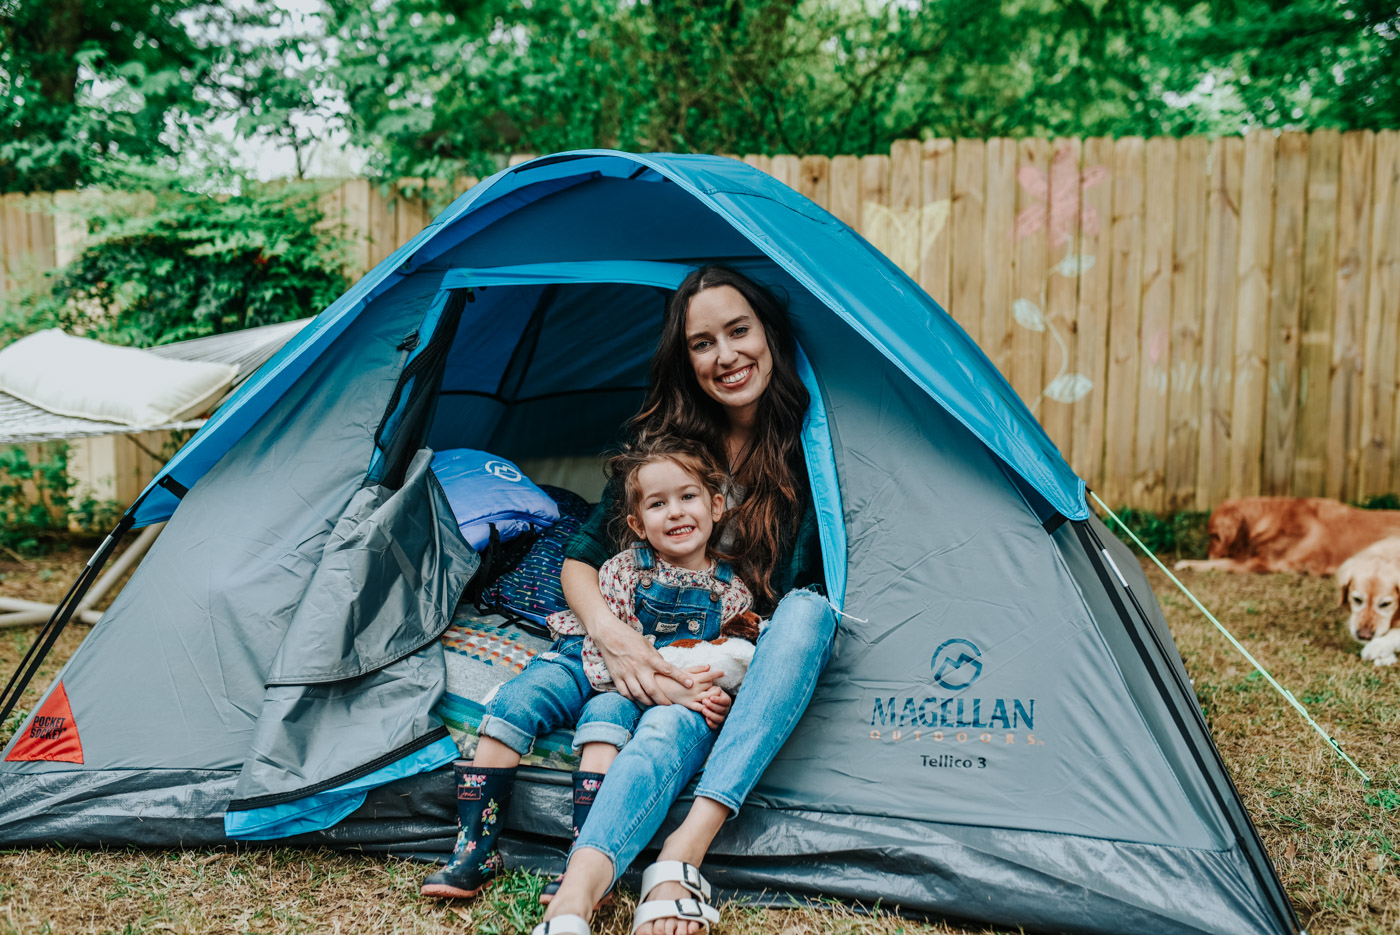 Backyard Camping by popular Memphis lifestyle blog, Lone Star Looking Glass: image of a mom wearing a Academy BCG Women's Slub Solid T-shirt and Academy Carhartt Women's Rugged Flex Hamilton Flannel Work Shirt and sitting with her daughter in a Academy Magellan Outdoors Tellico 3 Person Dome Tent with a Academy Queen-Size Plush Top Airbed and Academy Magellan Outdoors Kids' 45-Degree F Rectangular Sleeping Bag inside.